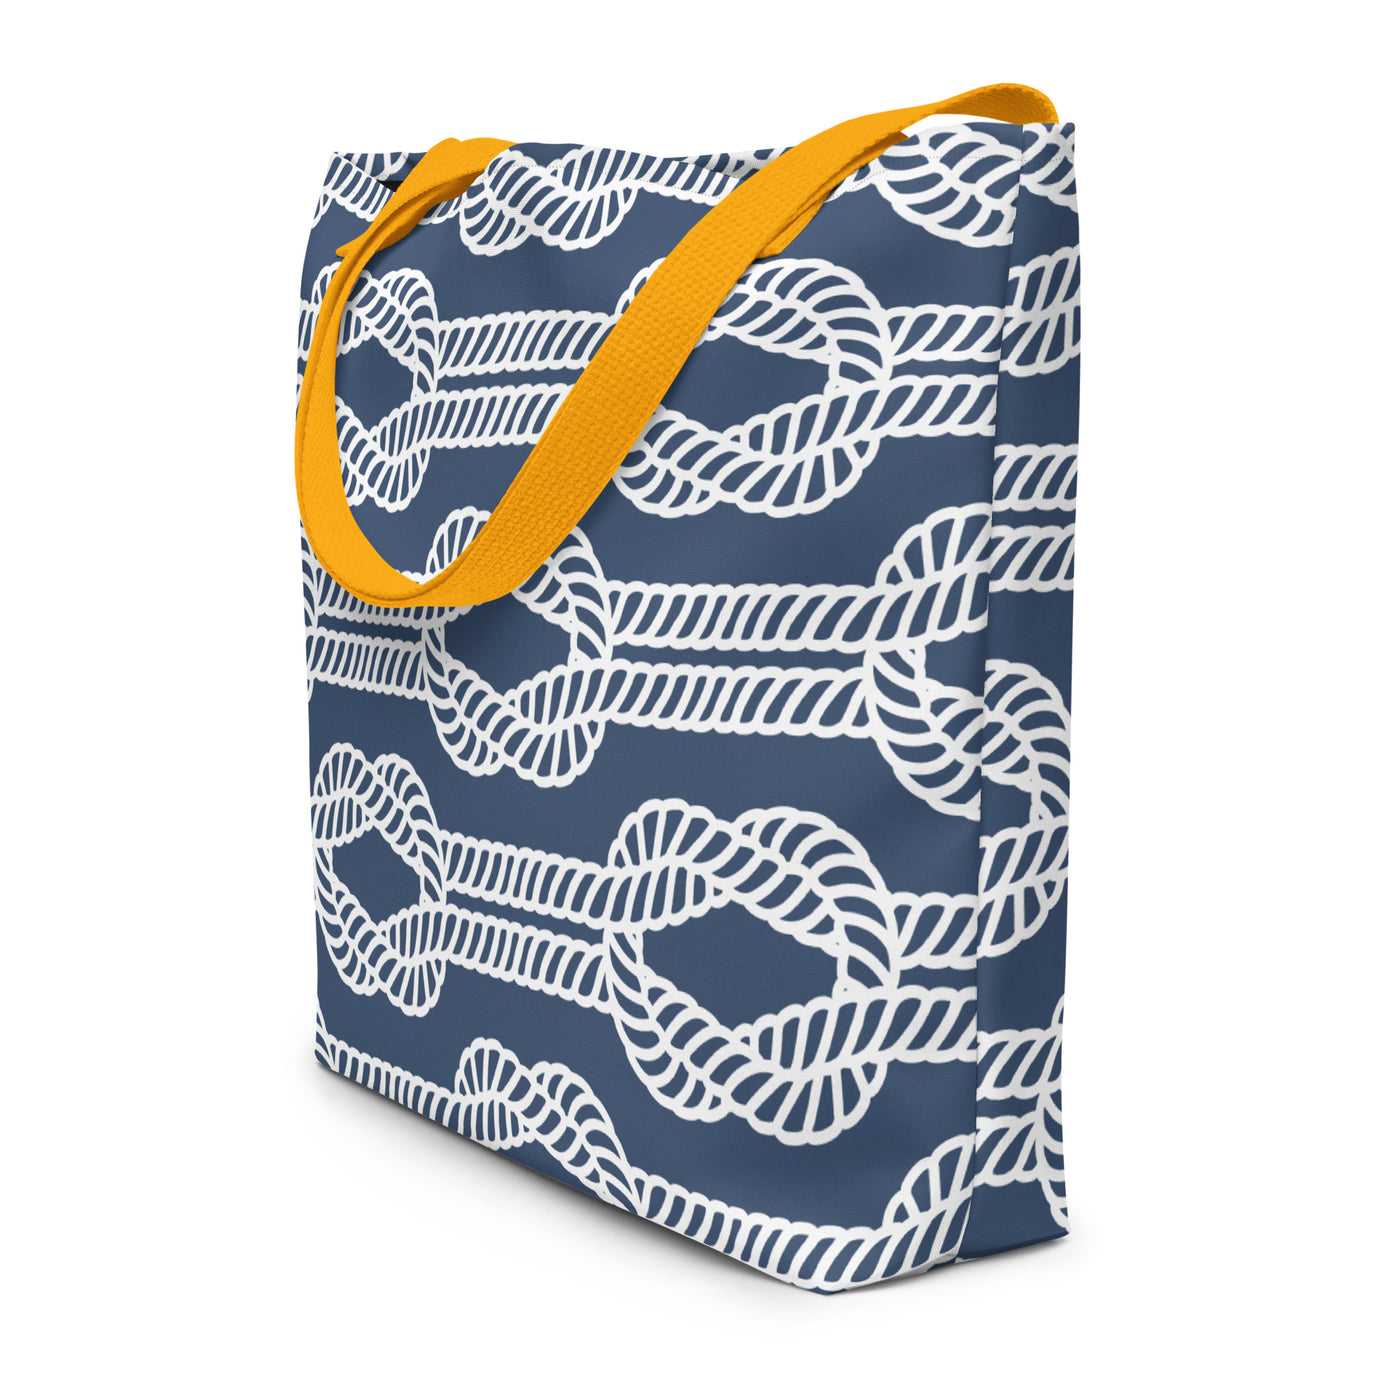 Knotty Tote Bag